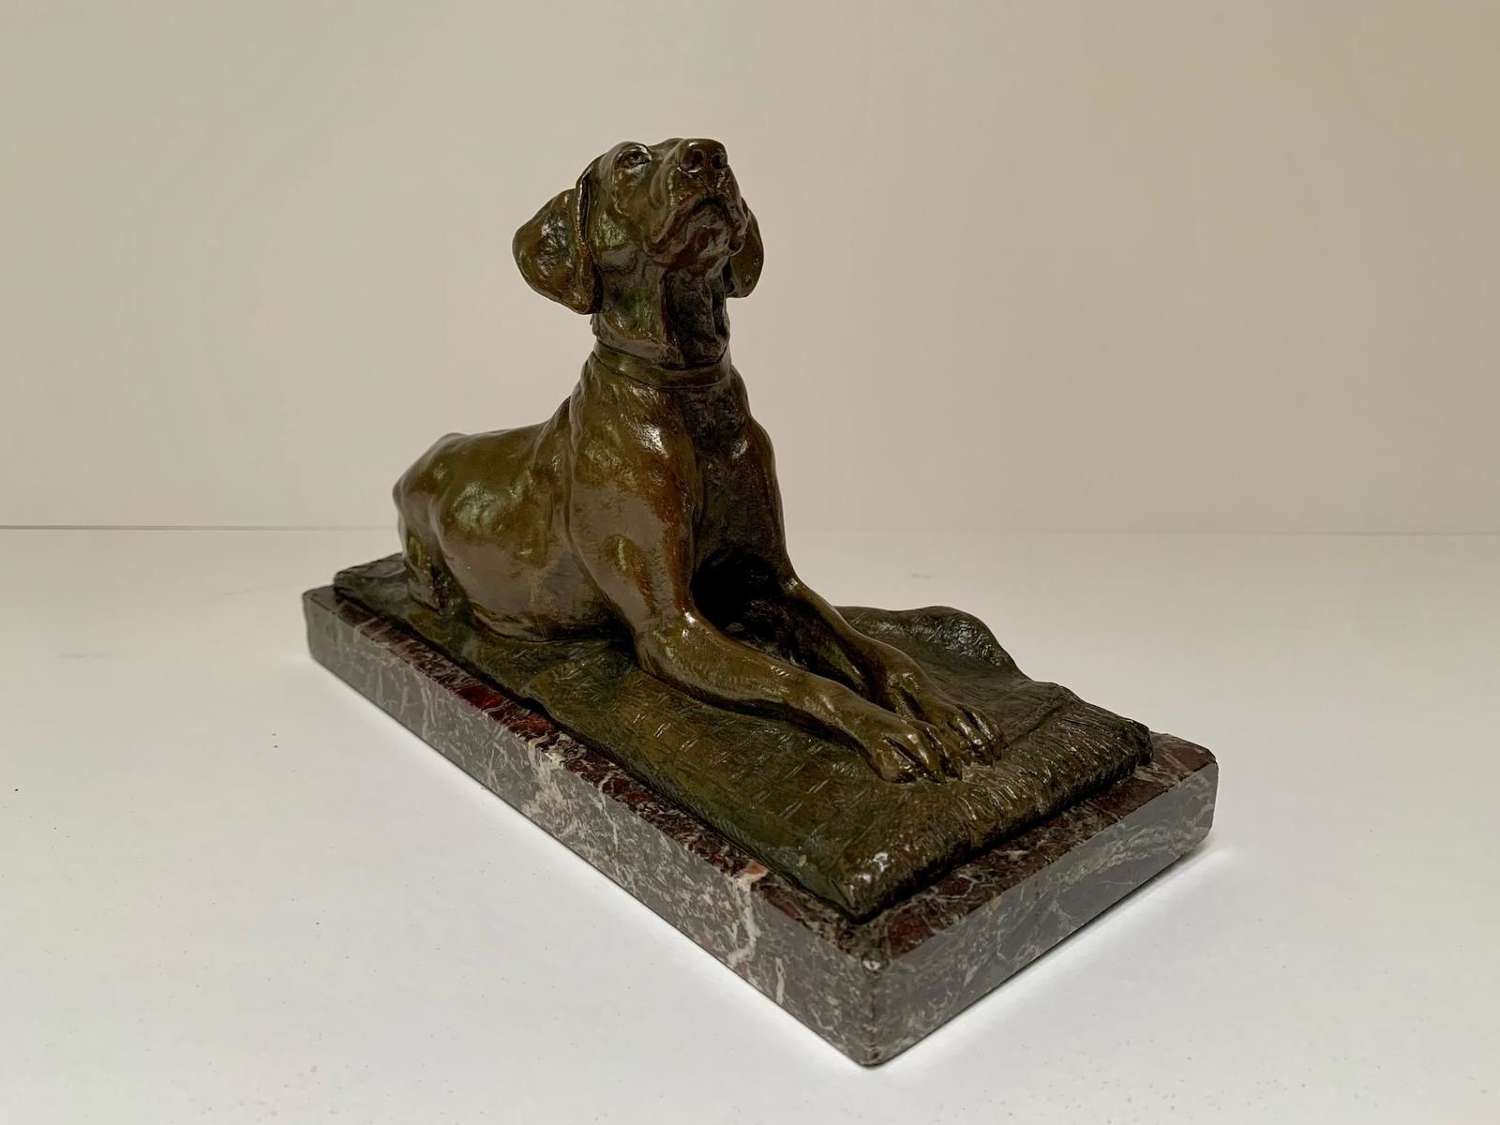 19th Century Bronze Figure of a Hound on a Rug